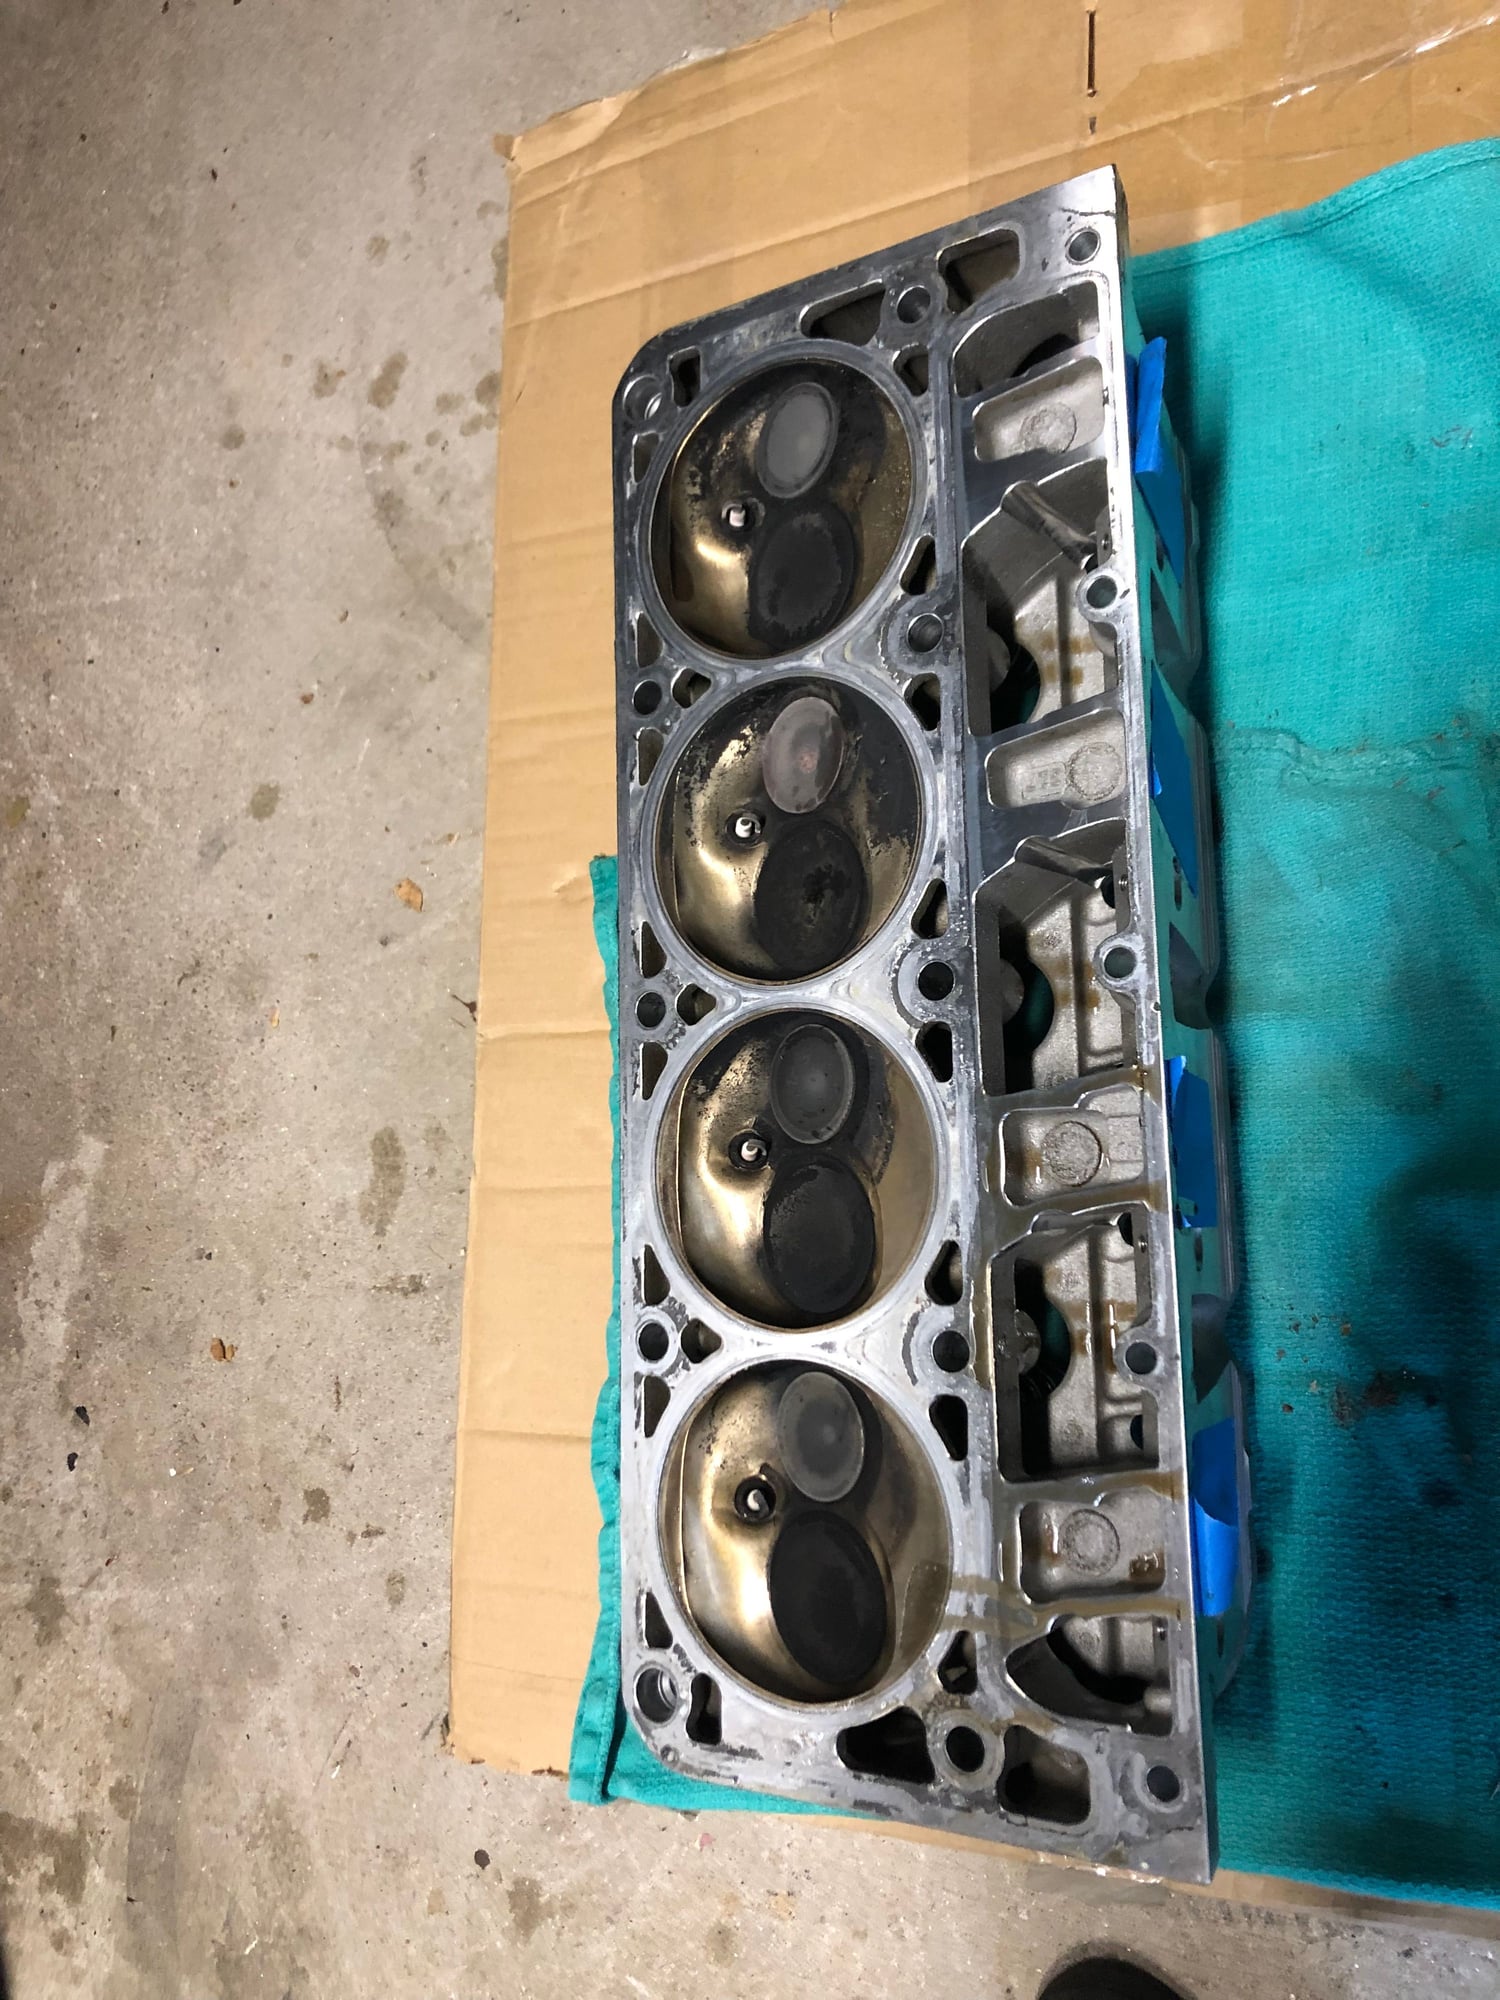  - 226cc LS6 CNC Cylinder Heads w/Springs - Rocky Hill, CT 06067, United States